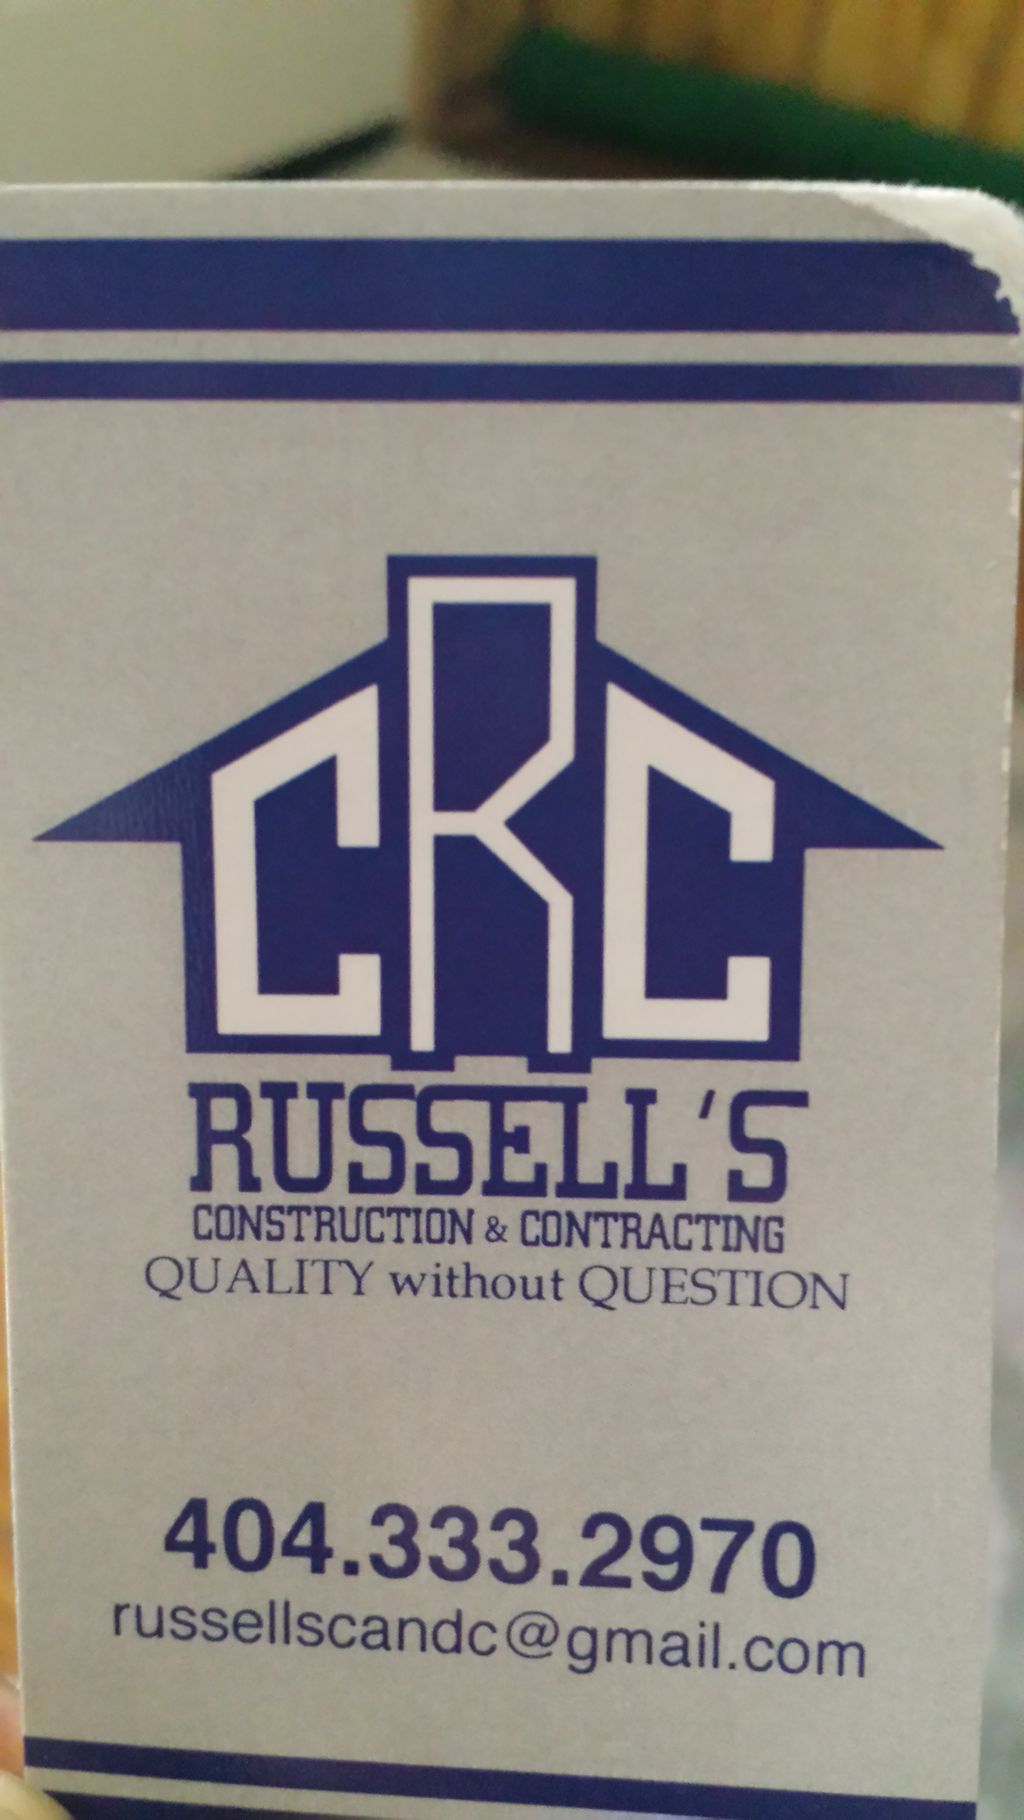 Russell's Construction and Contracting